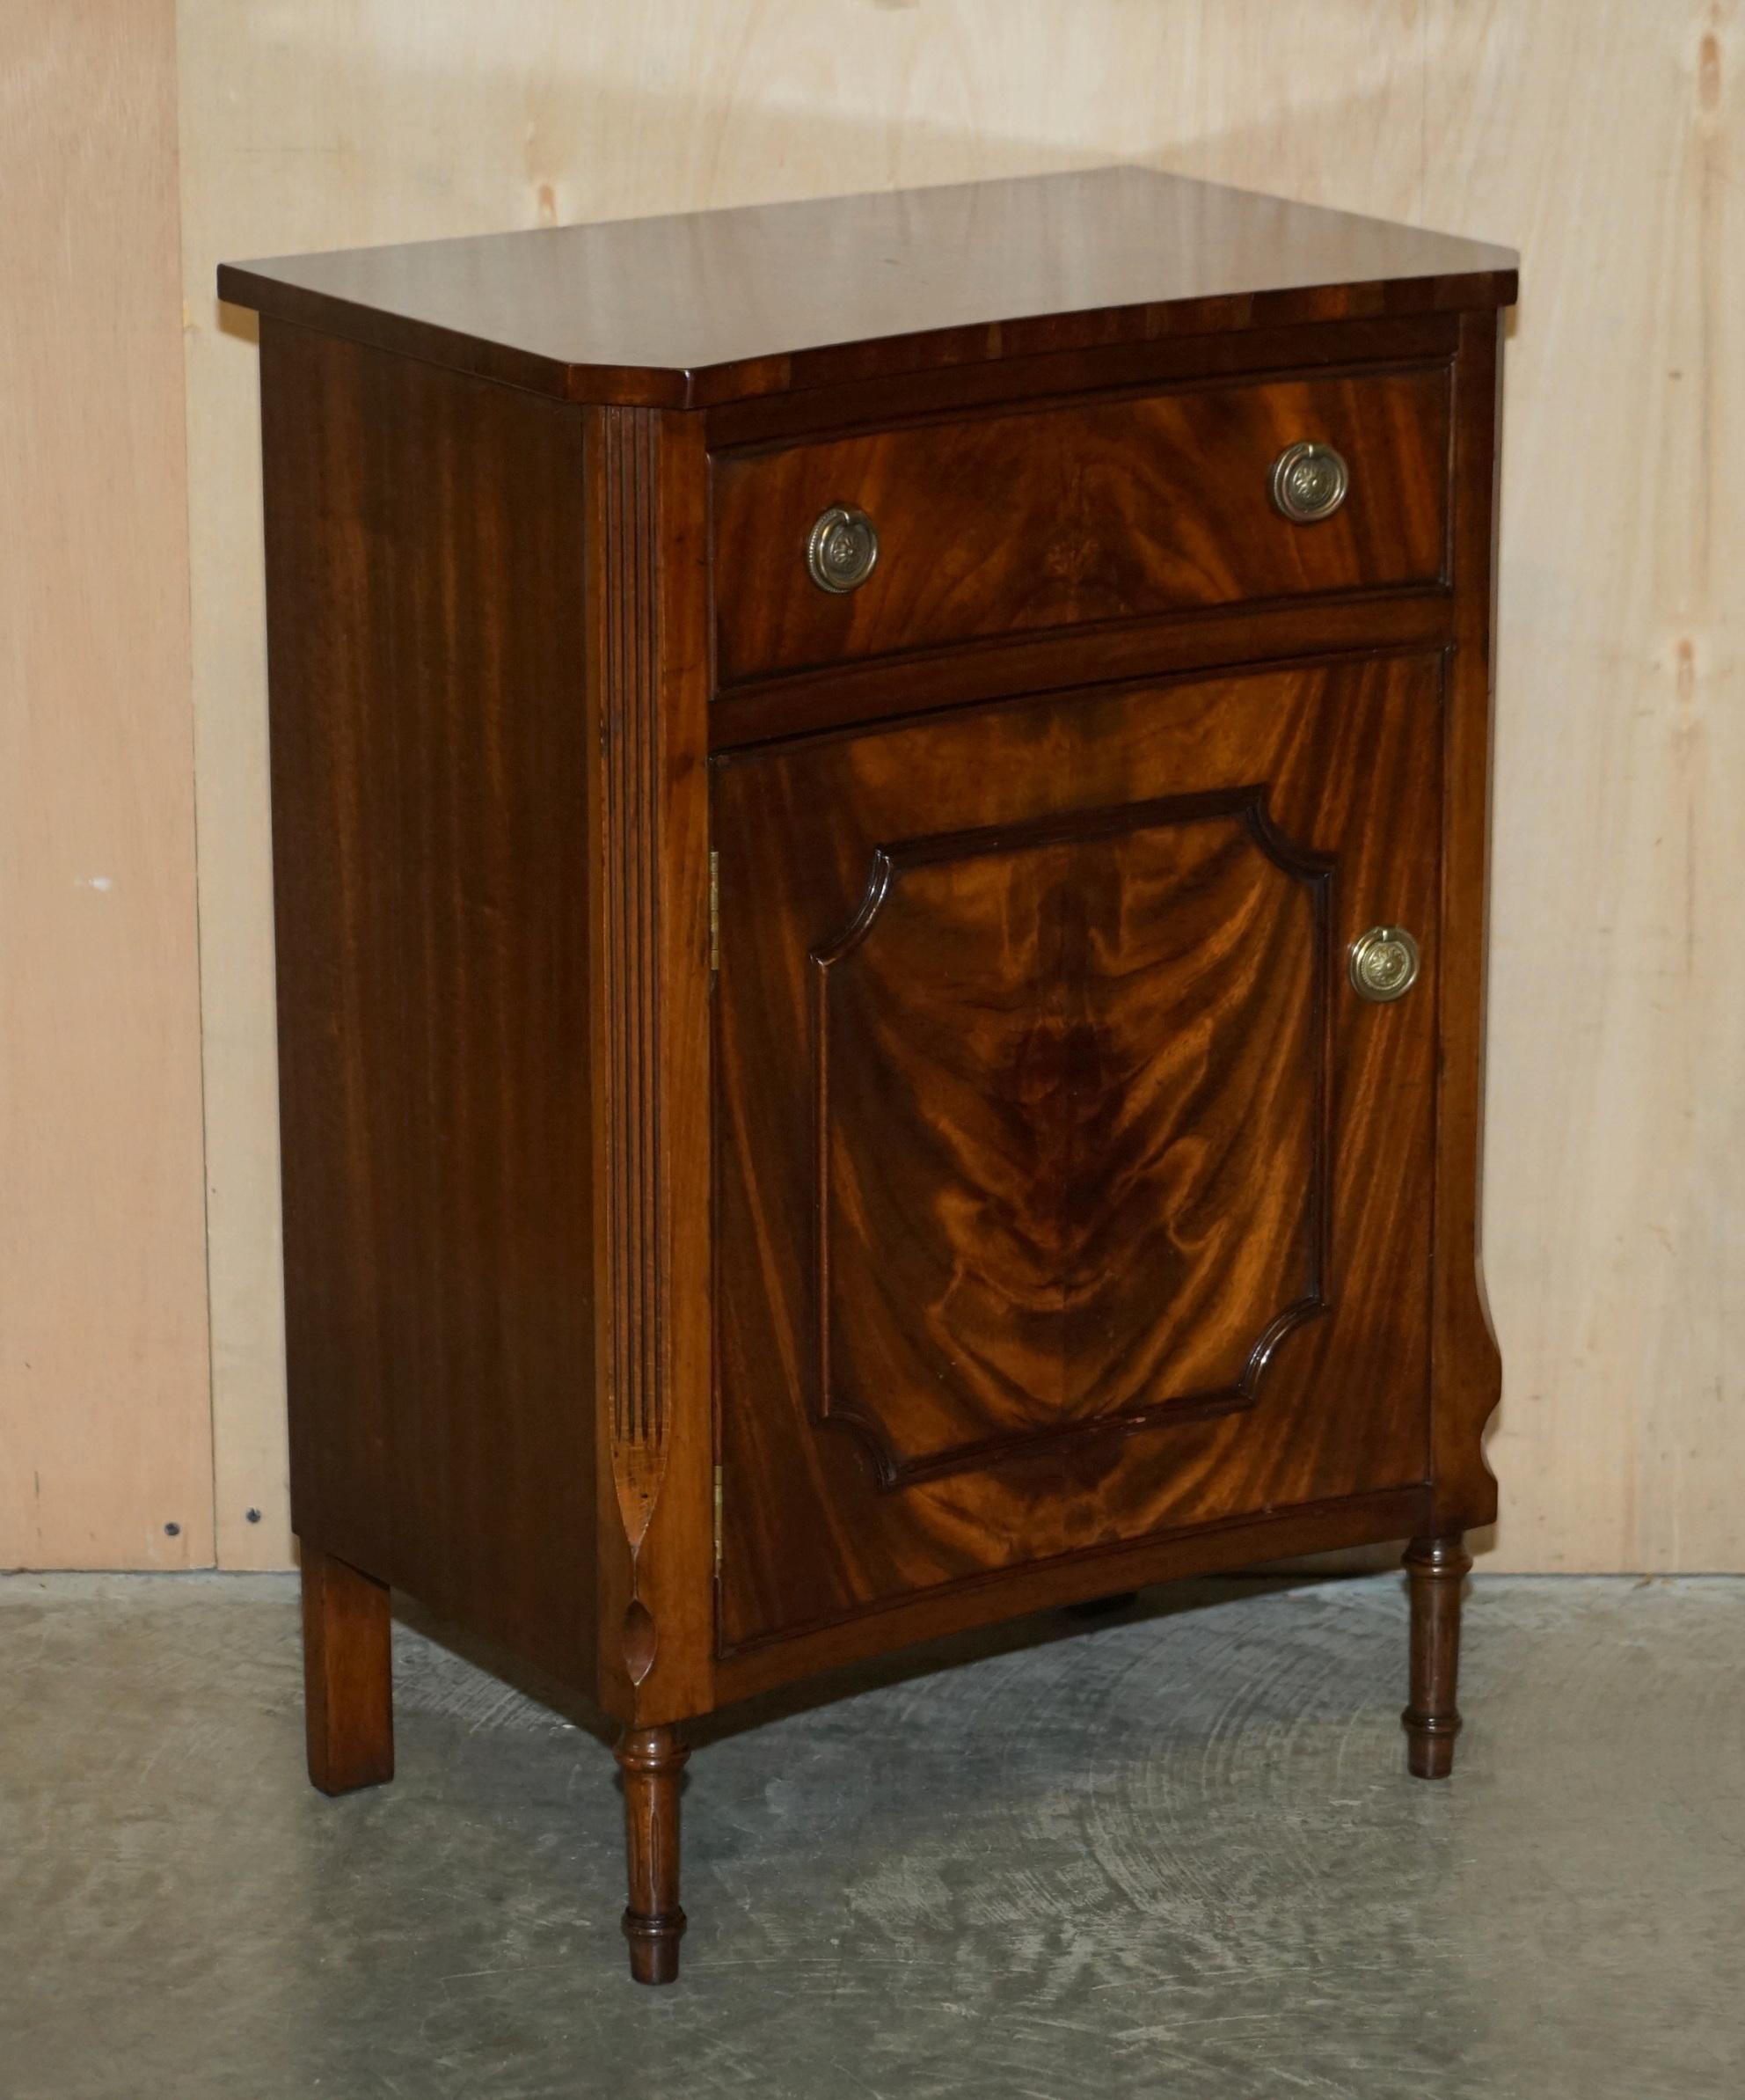 We are delighted to offer for sale this sublime pair of vintage Flamed Mahogany bow fronted side end tables with single drawers.

A truly stunning and well made pair, the timber is flamed mahogany, it has a wonderful patina and really glows in the